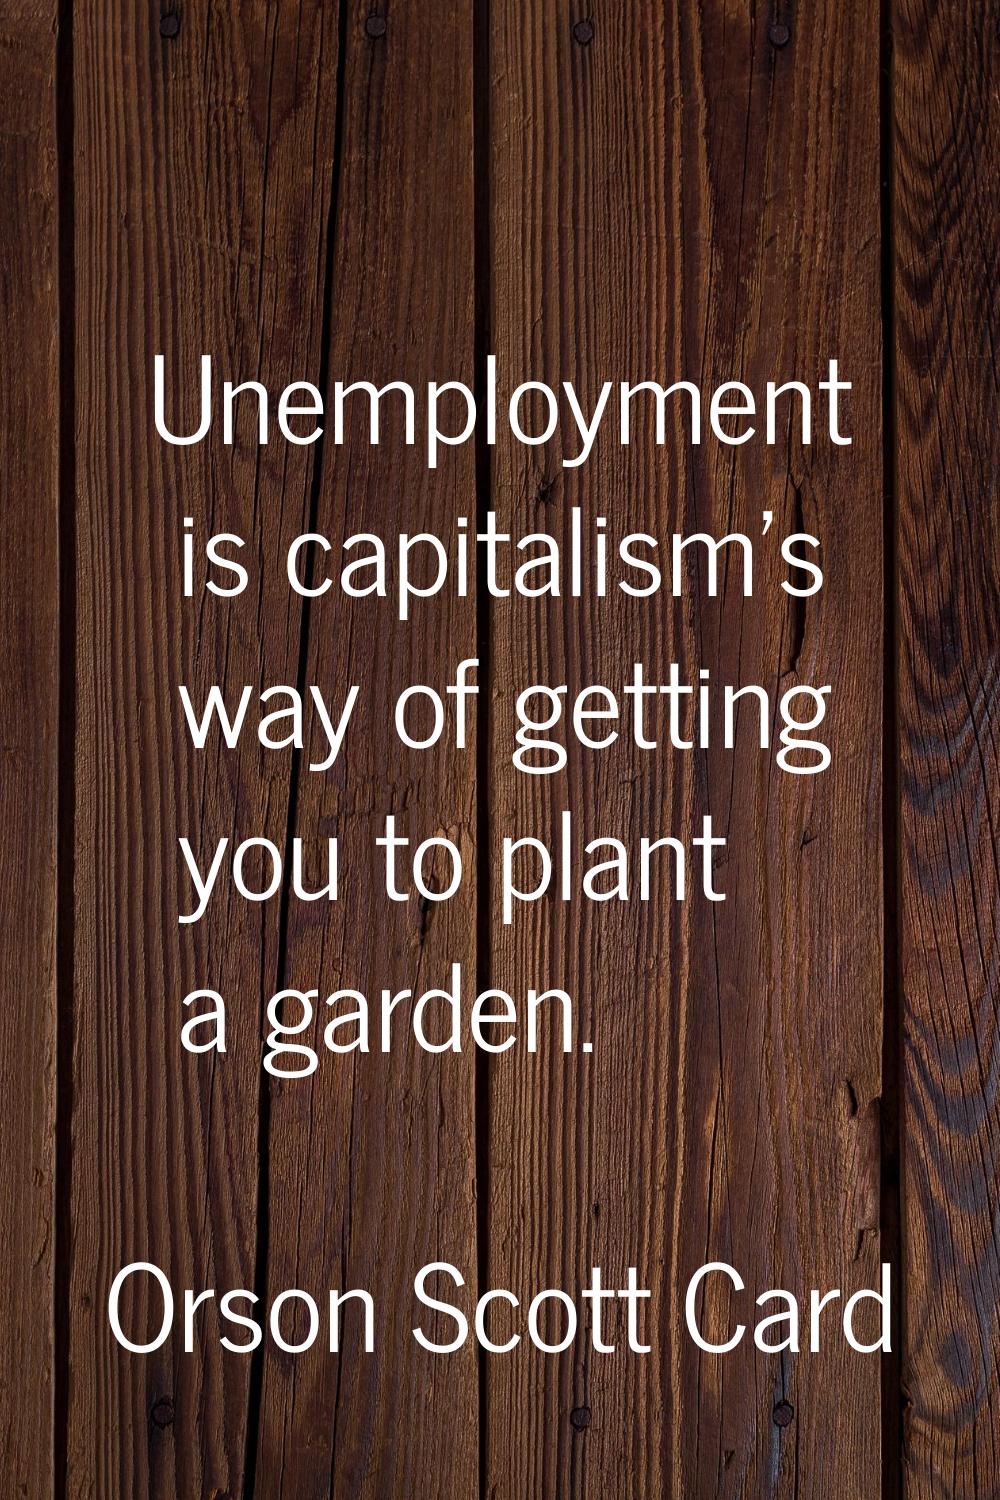 Unemployment is capitalism's way of getting you to plant a garden.